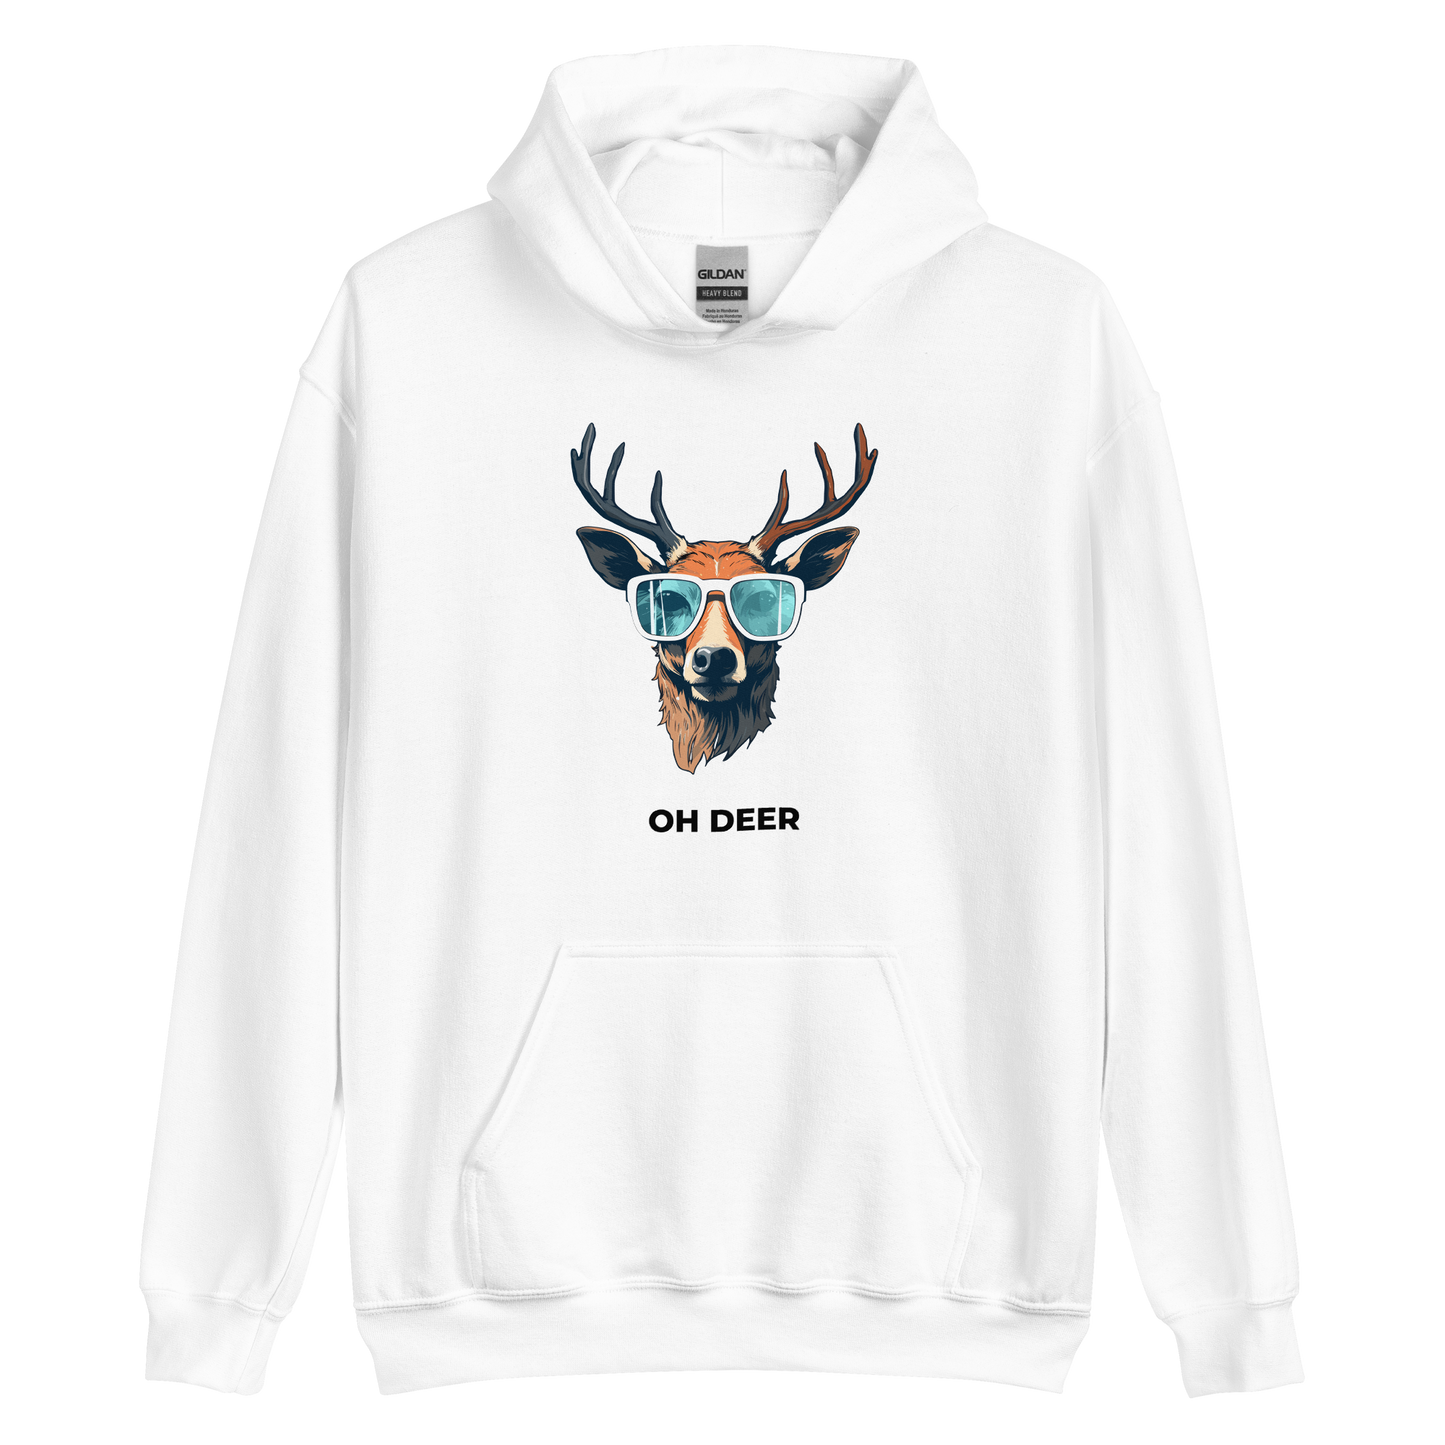 White Deer Hoodie featuring a hilarious Oh Deer graphic on the chest - Funny Graphic Deer Hoodies - Boozy Fox